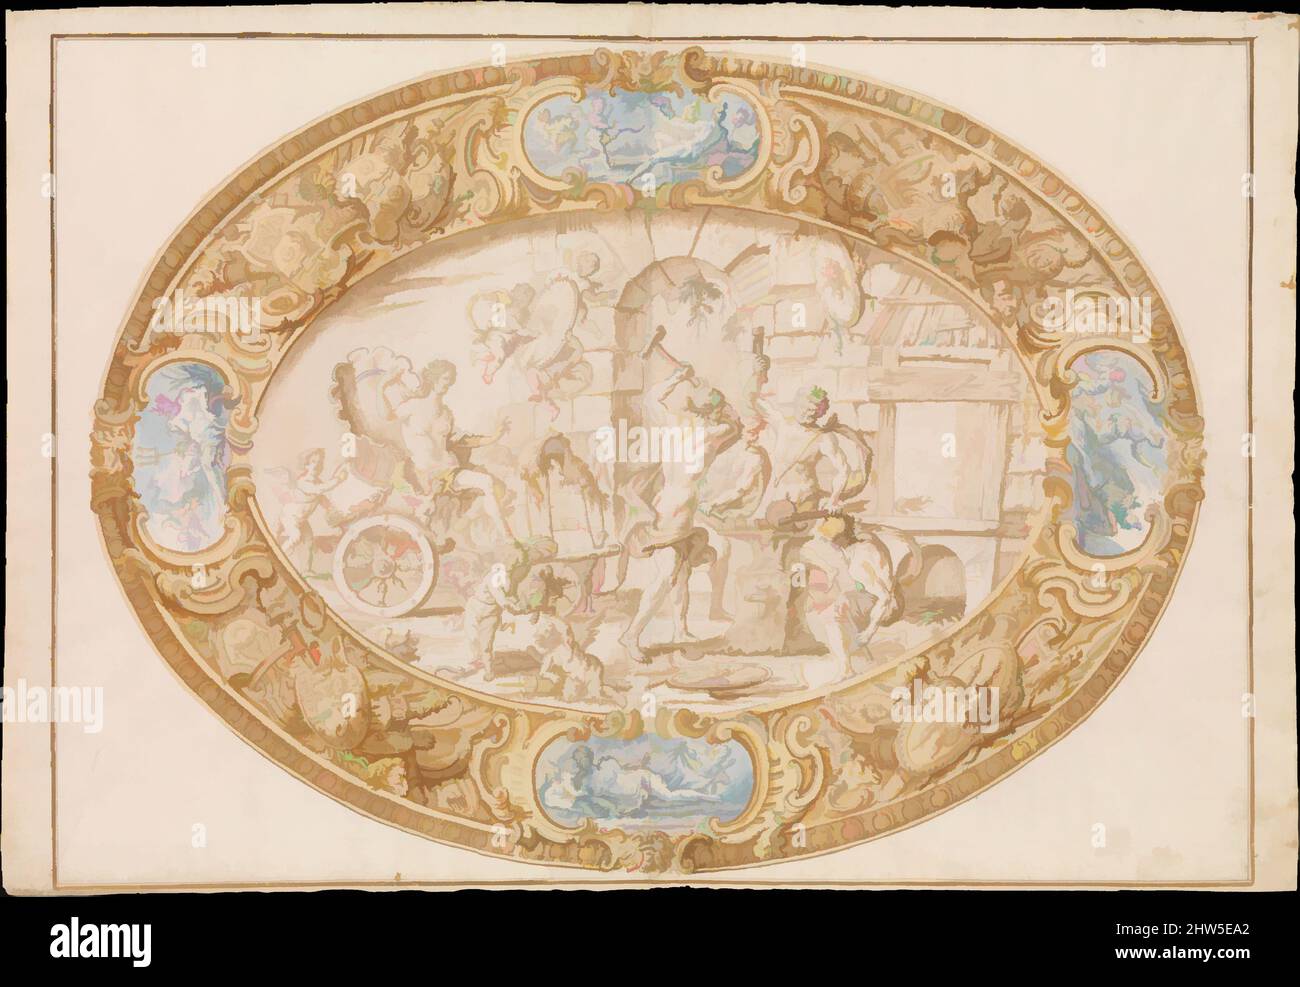 Art inspired by Design (Full-Scale Working Drawing) for a Large Oval Silver Dish with Silver Gilt Border Showing Vulcan's Forge, 1646–1722, Pen and brown ink, brush and brown wash, yellow and blue watercolor over black chalk. Framing lines in pen and brown ink. On two glued sheets, Classic works modernized by Artotop with a splash of modernity. Shapes, color and value, eye-catching visual impact on art. Emotions through freedom of artworks in a contemporary way. A timeless message pursuing a wildly creative new direction. Artists turning to the digital medium and creating the Artotop NFT Stock Photo